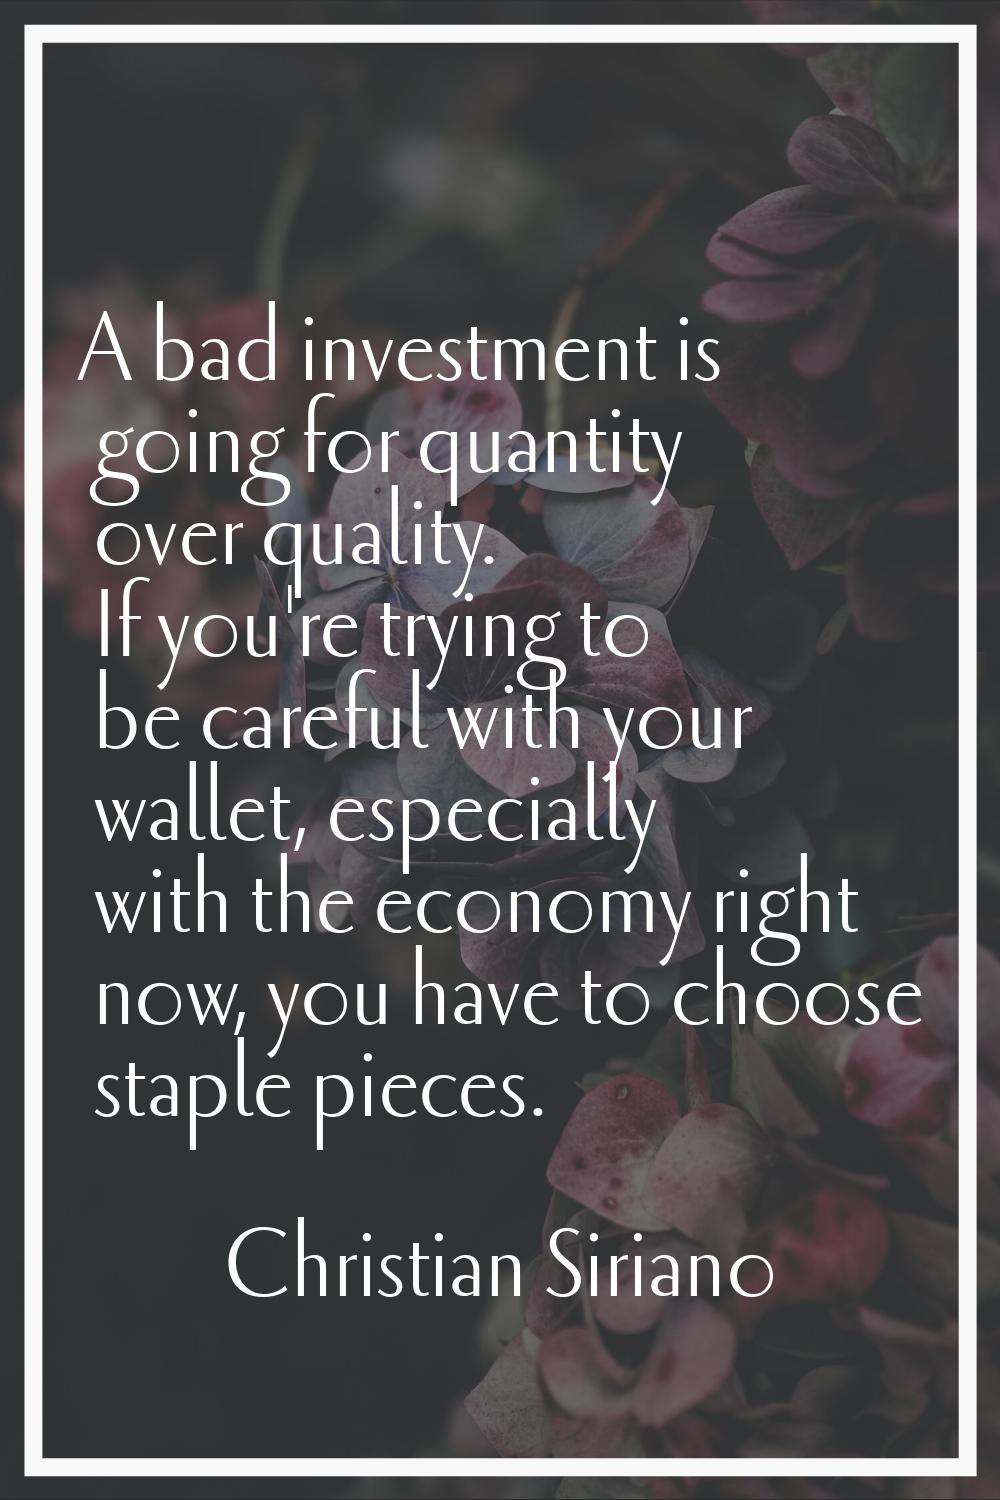 A bad investment is going for quantity over quality. If you're trying to be careful with your walle